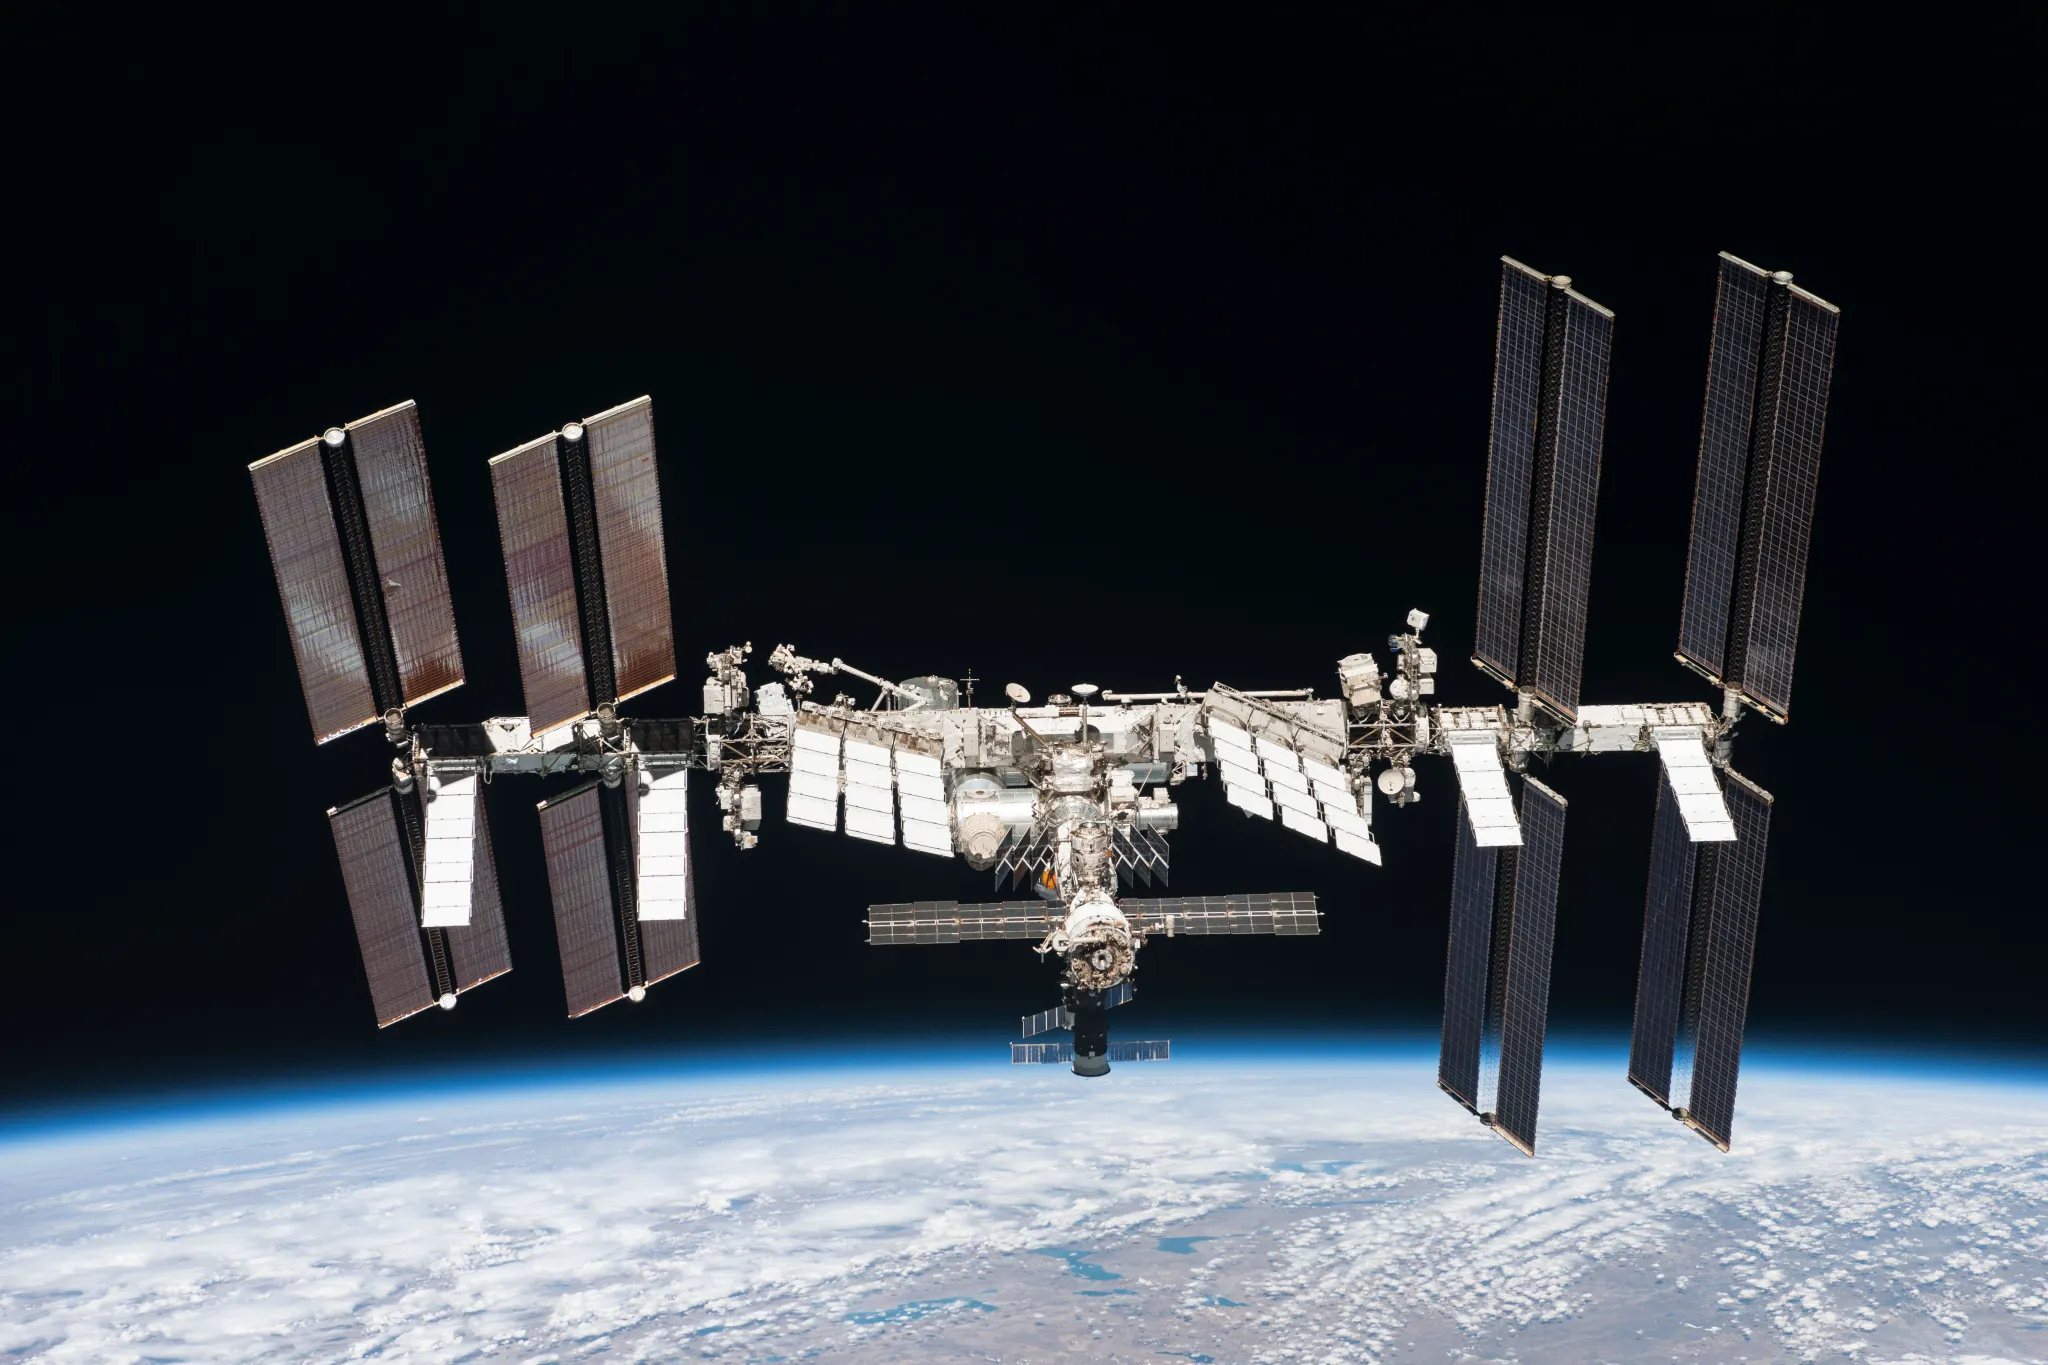 The International Space Station orbits Earth, a testament to human ingenuity and a symbol of international partnership in space exploration.